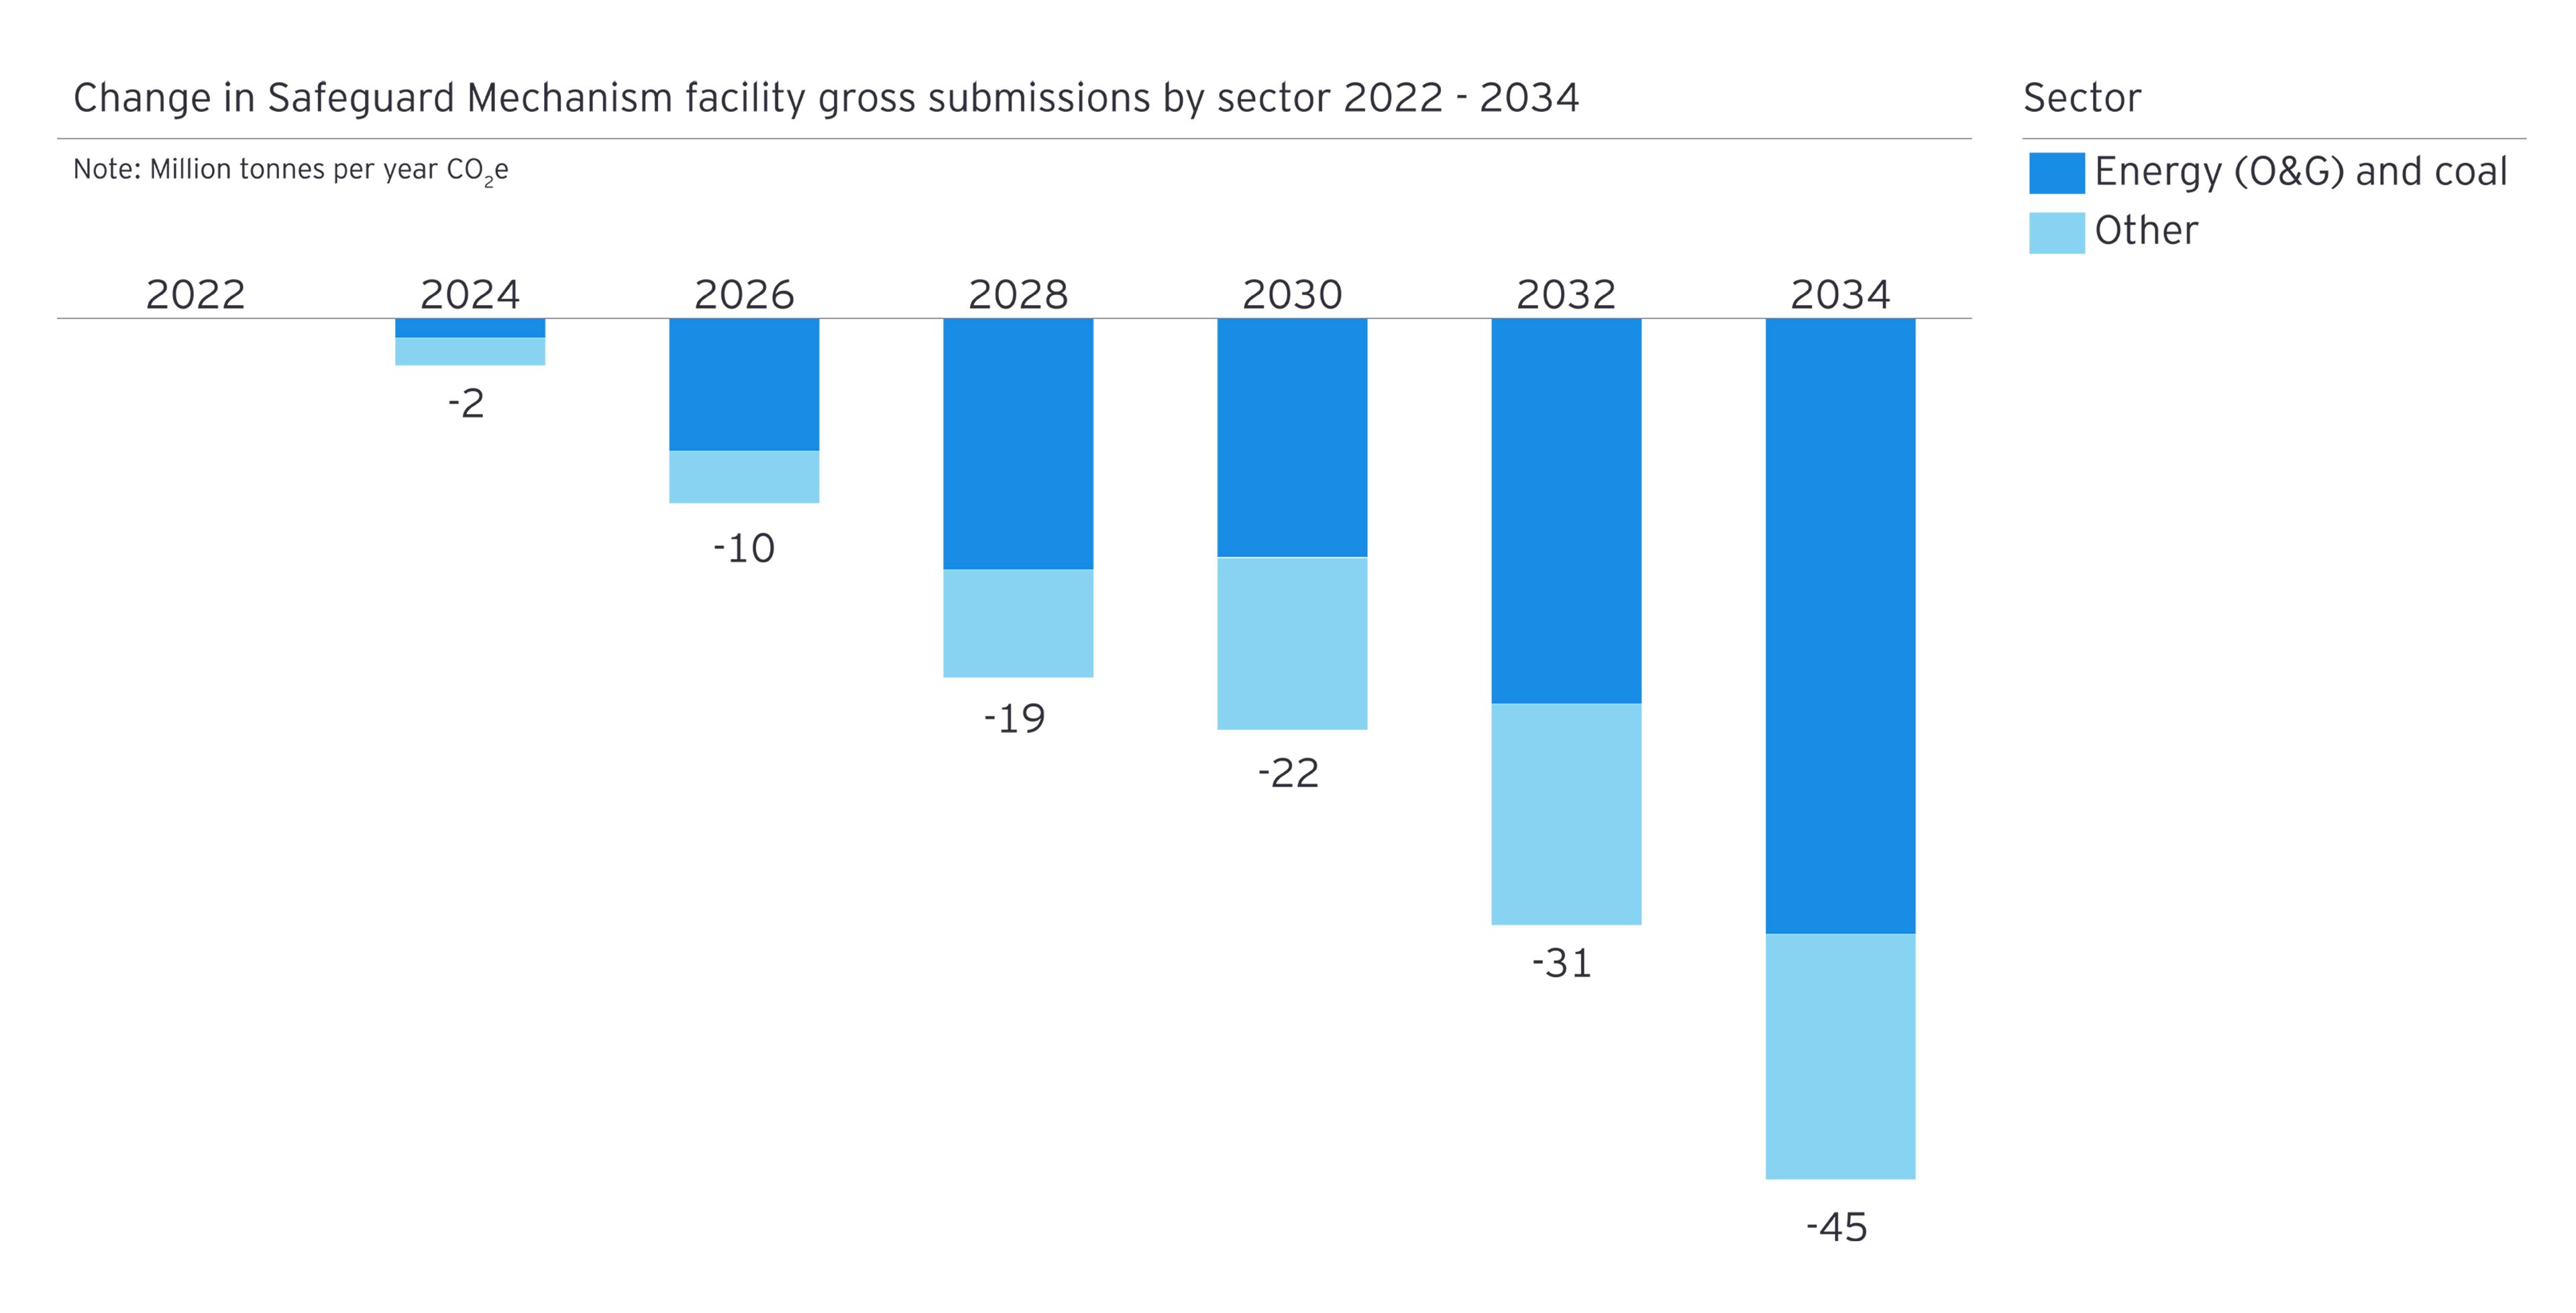 Change in Safeguard Mechanism facility gross emissions by sector, 2022-2034